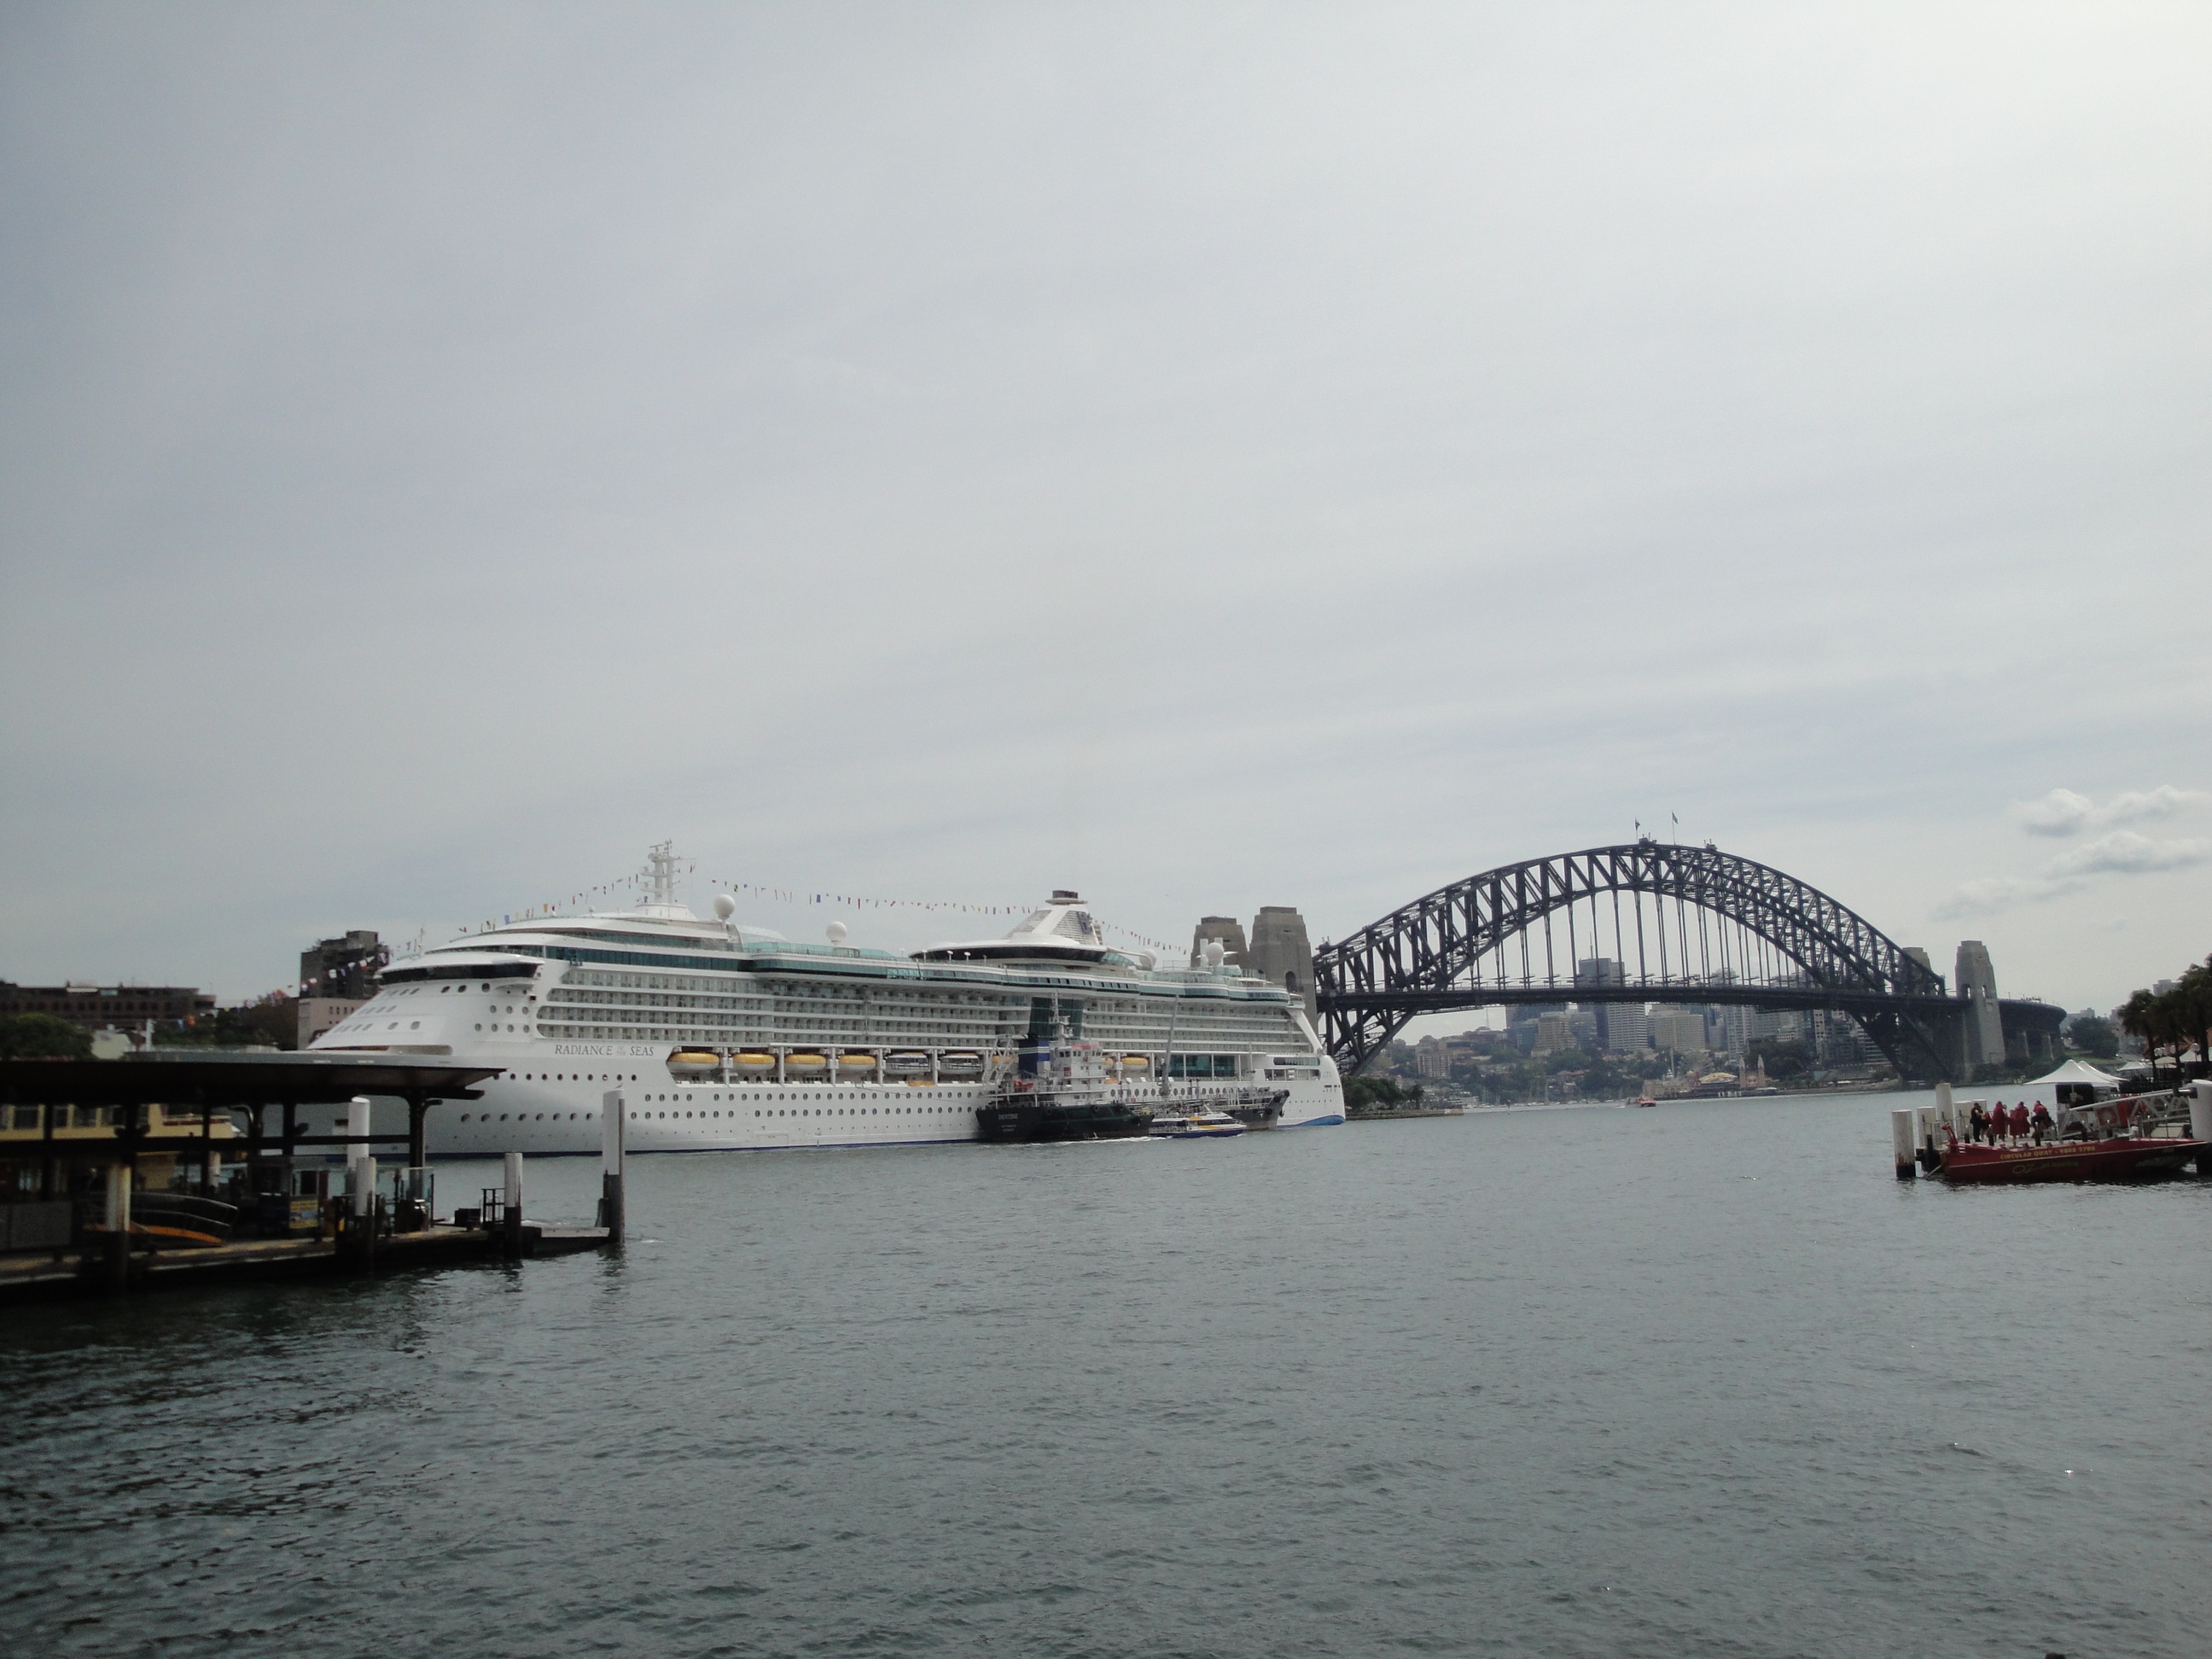 Radiance of the Seas in front of the Sydney Harbour Bridge